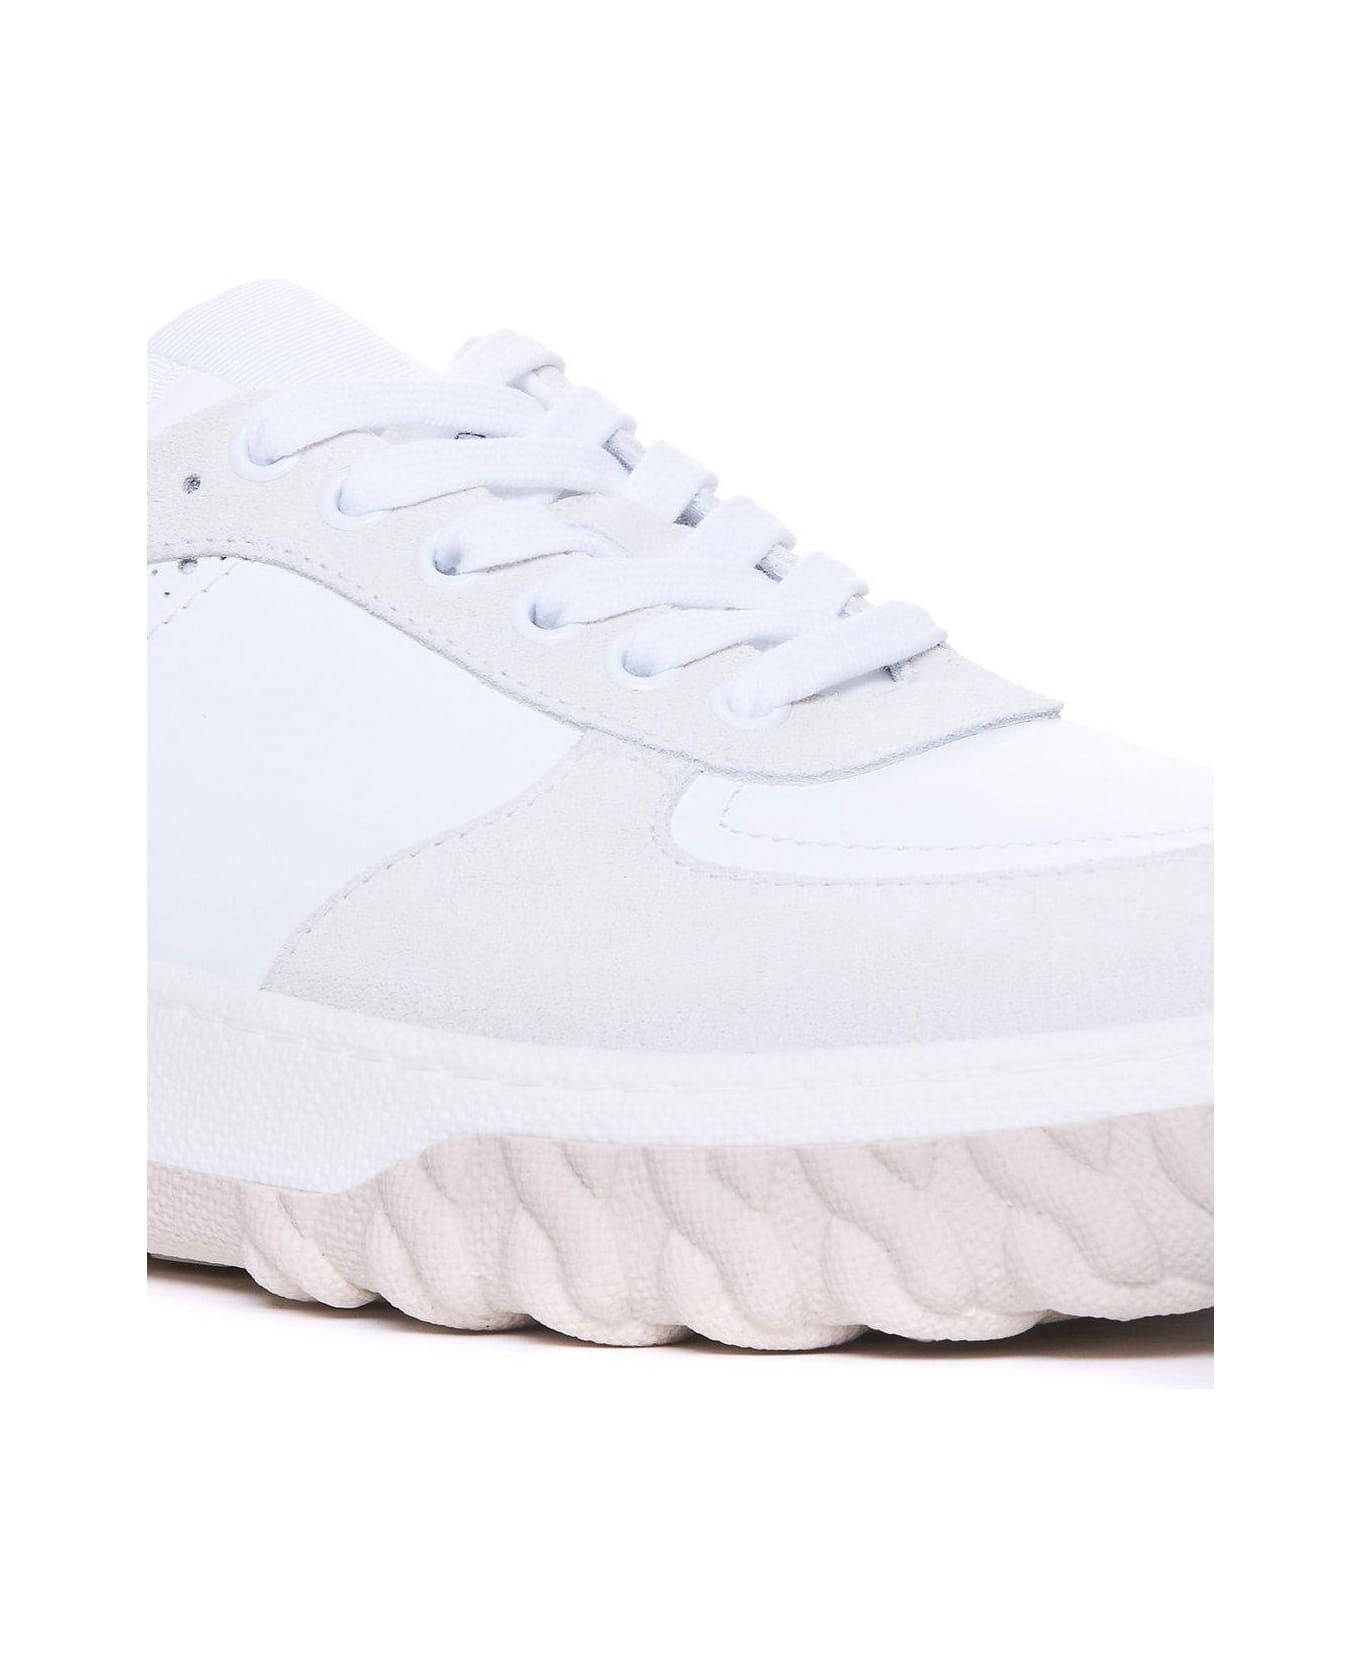 Thom Browne Letterman Panelled Low-top Sneakers - Tonal White Fun Mix